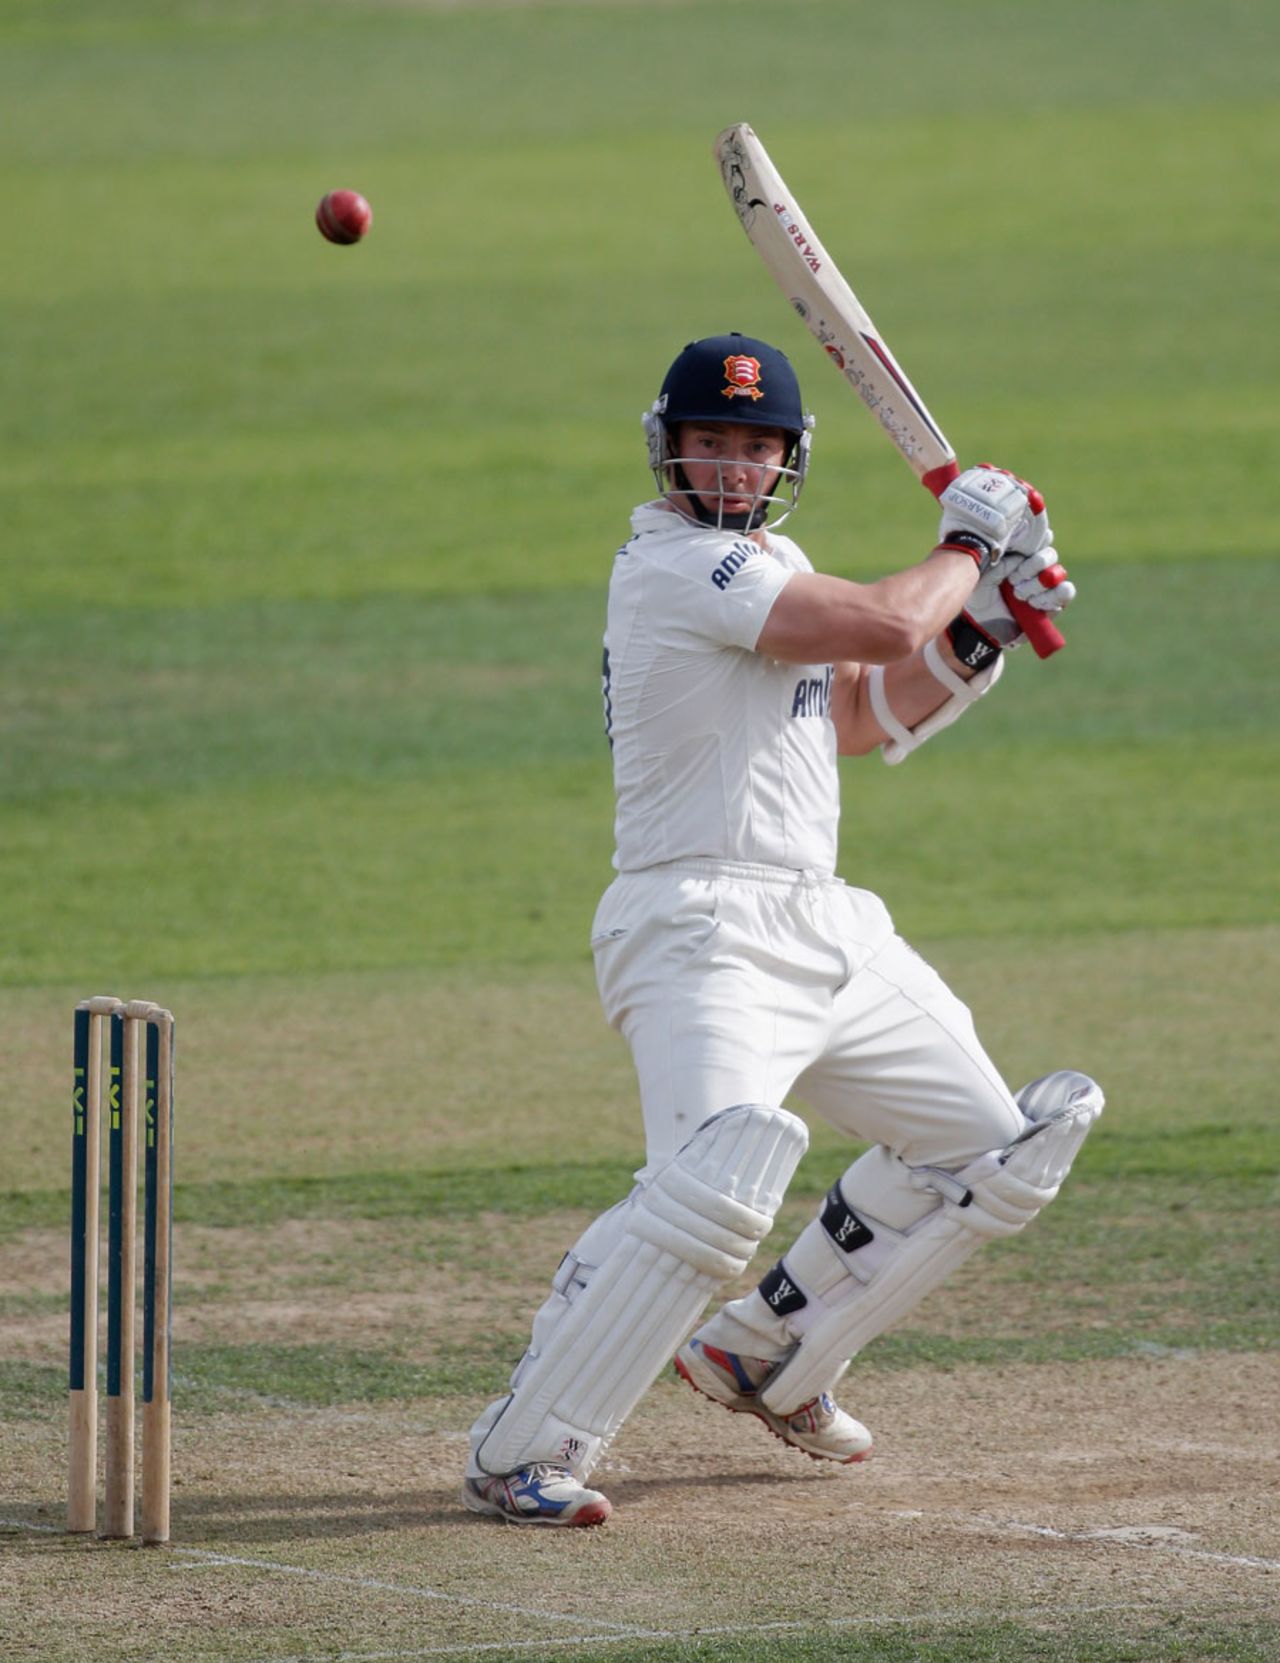 Graham Napier made 20 with two fours, Coutny Championship, Division Two, Chelmsford, 2nd day, September 12, 2012